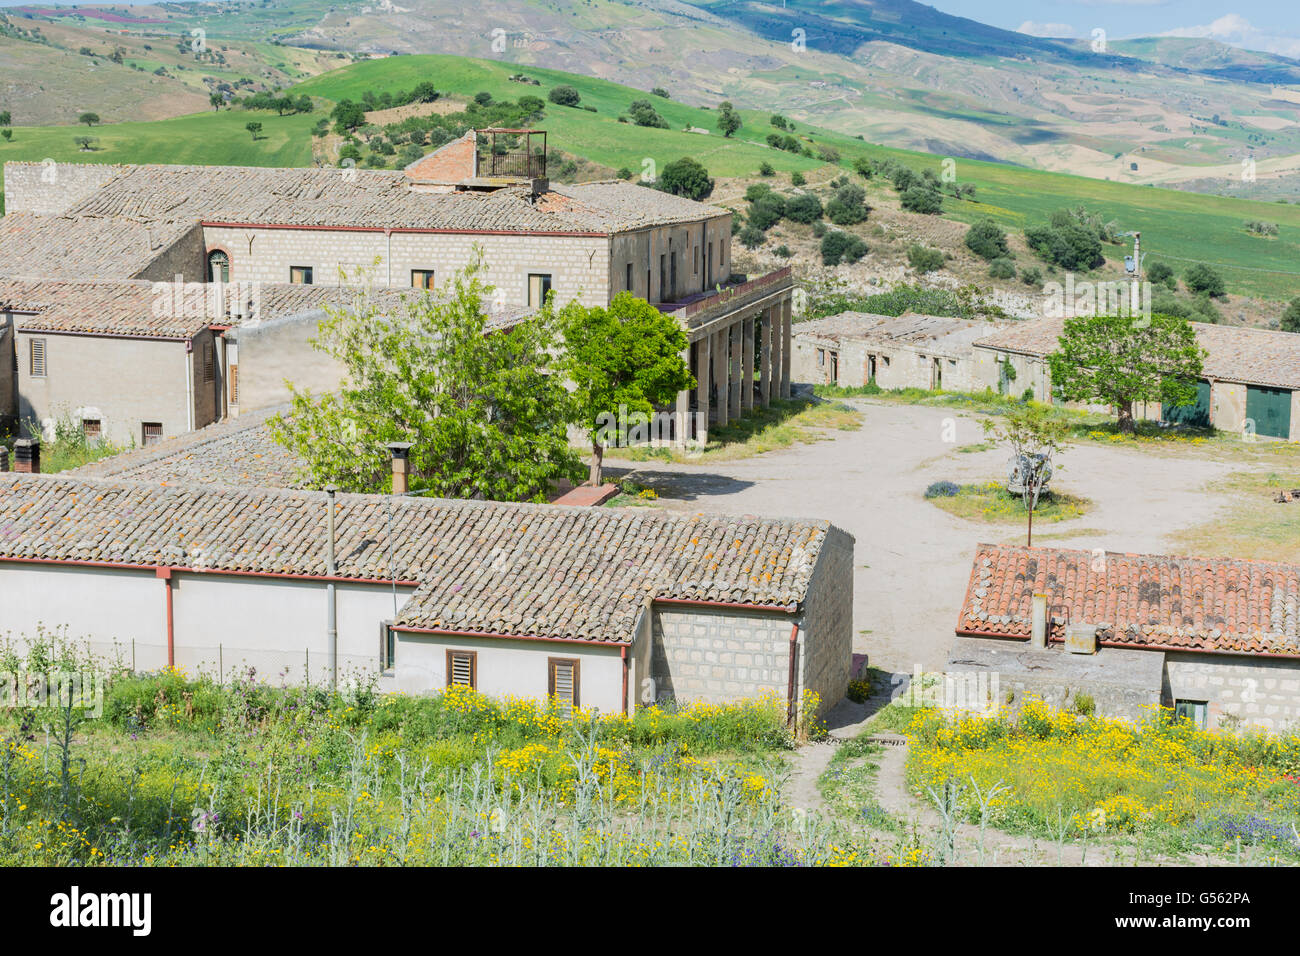 Sicilian landscape, with ancient and modern house, with olive and almond trees in bloom. Stock Photo